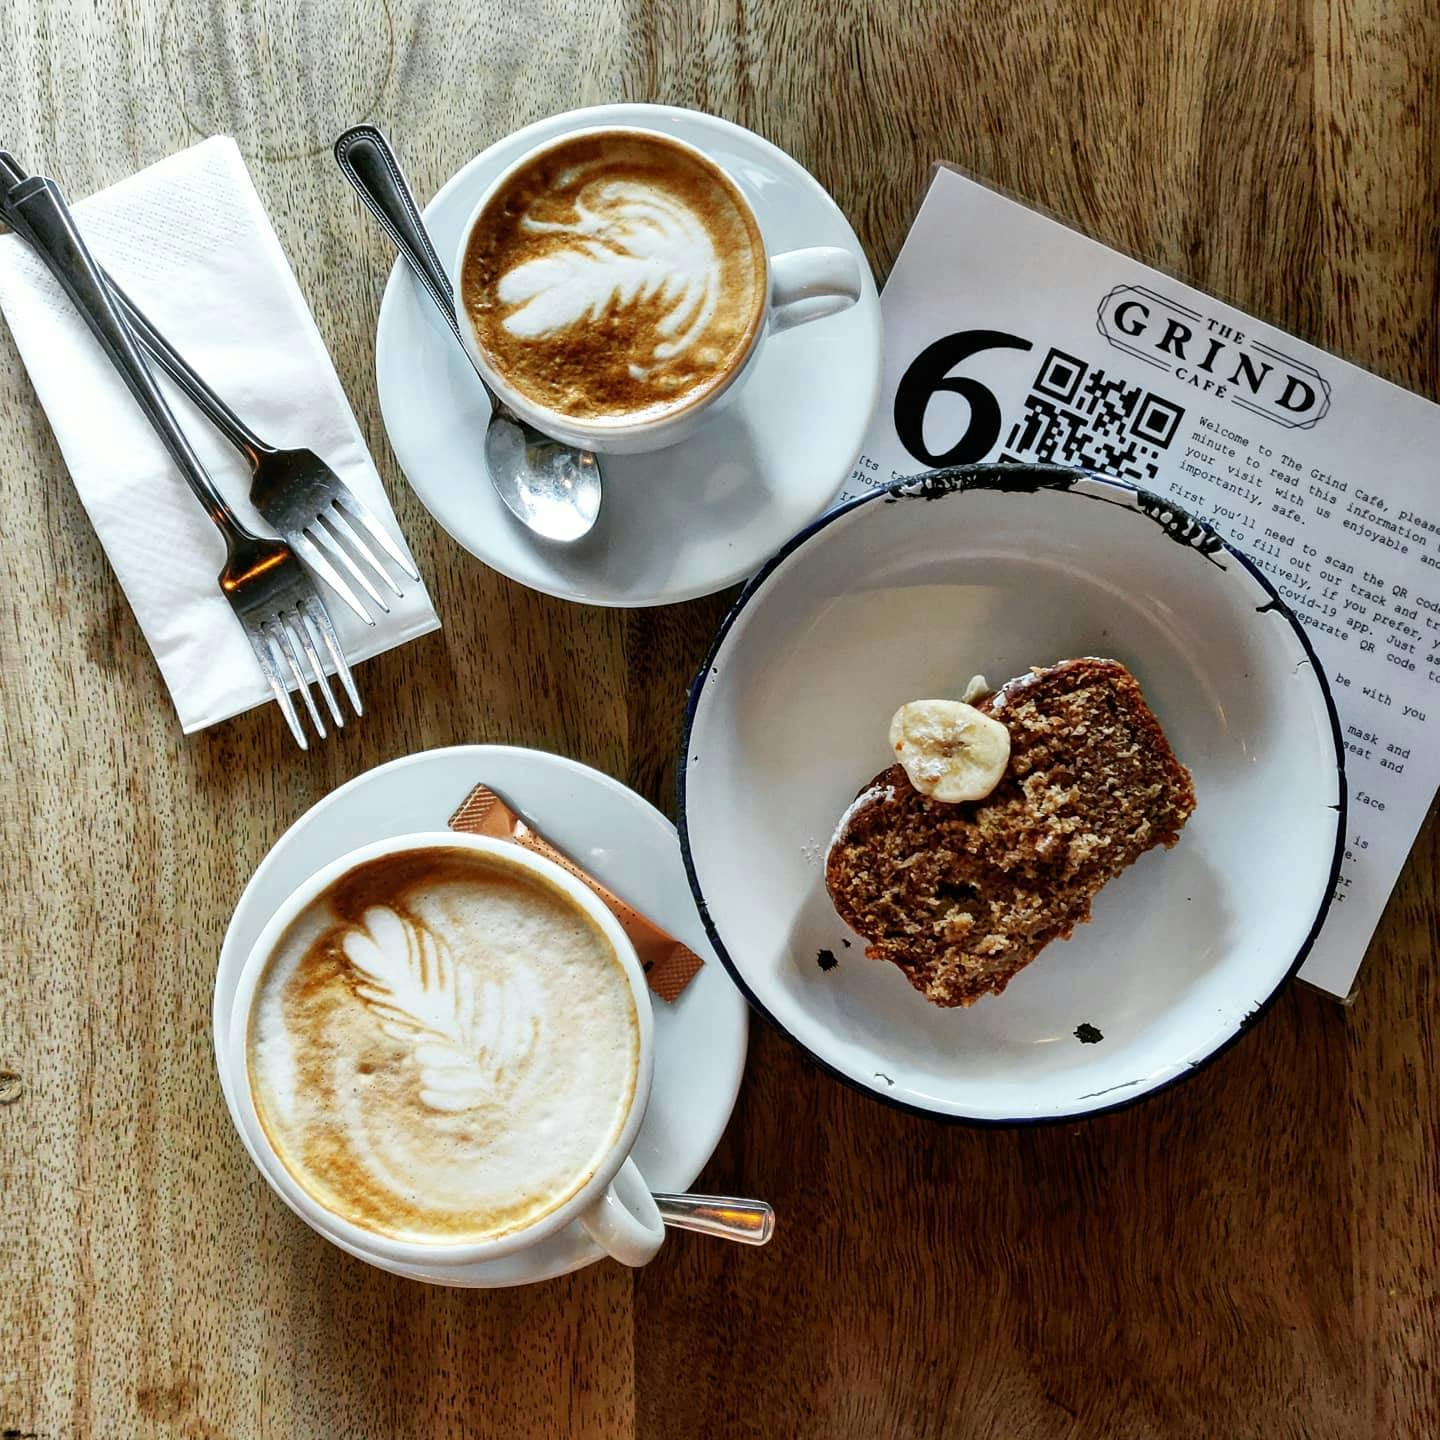 Coffee and cake from The Grind Café in Kelham Island